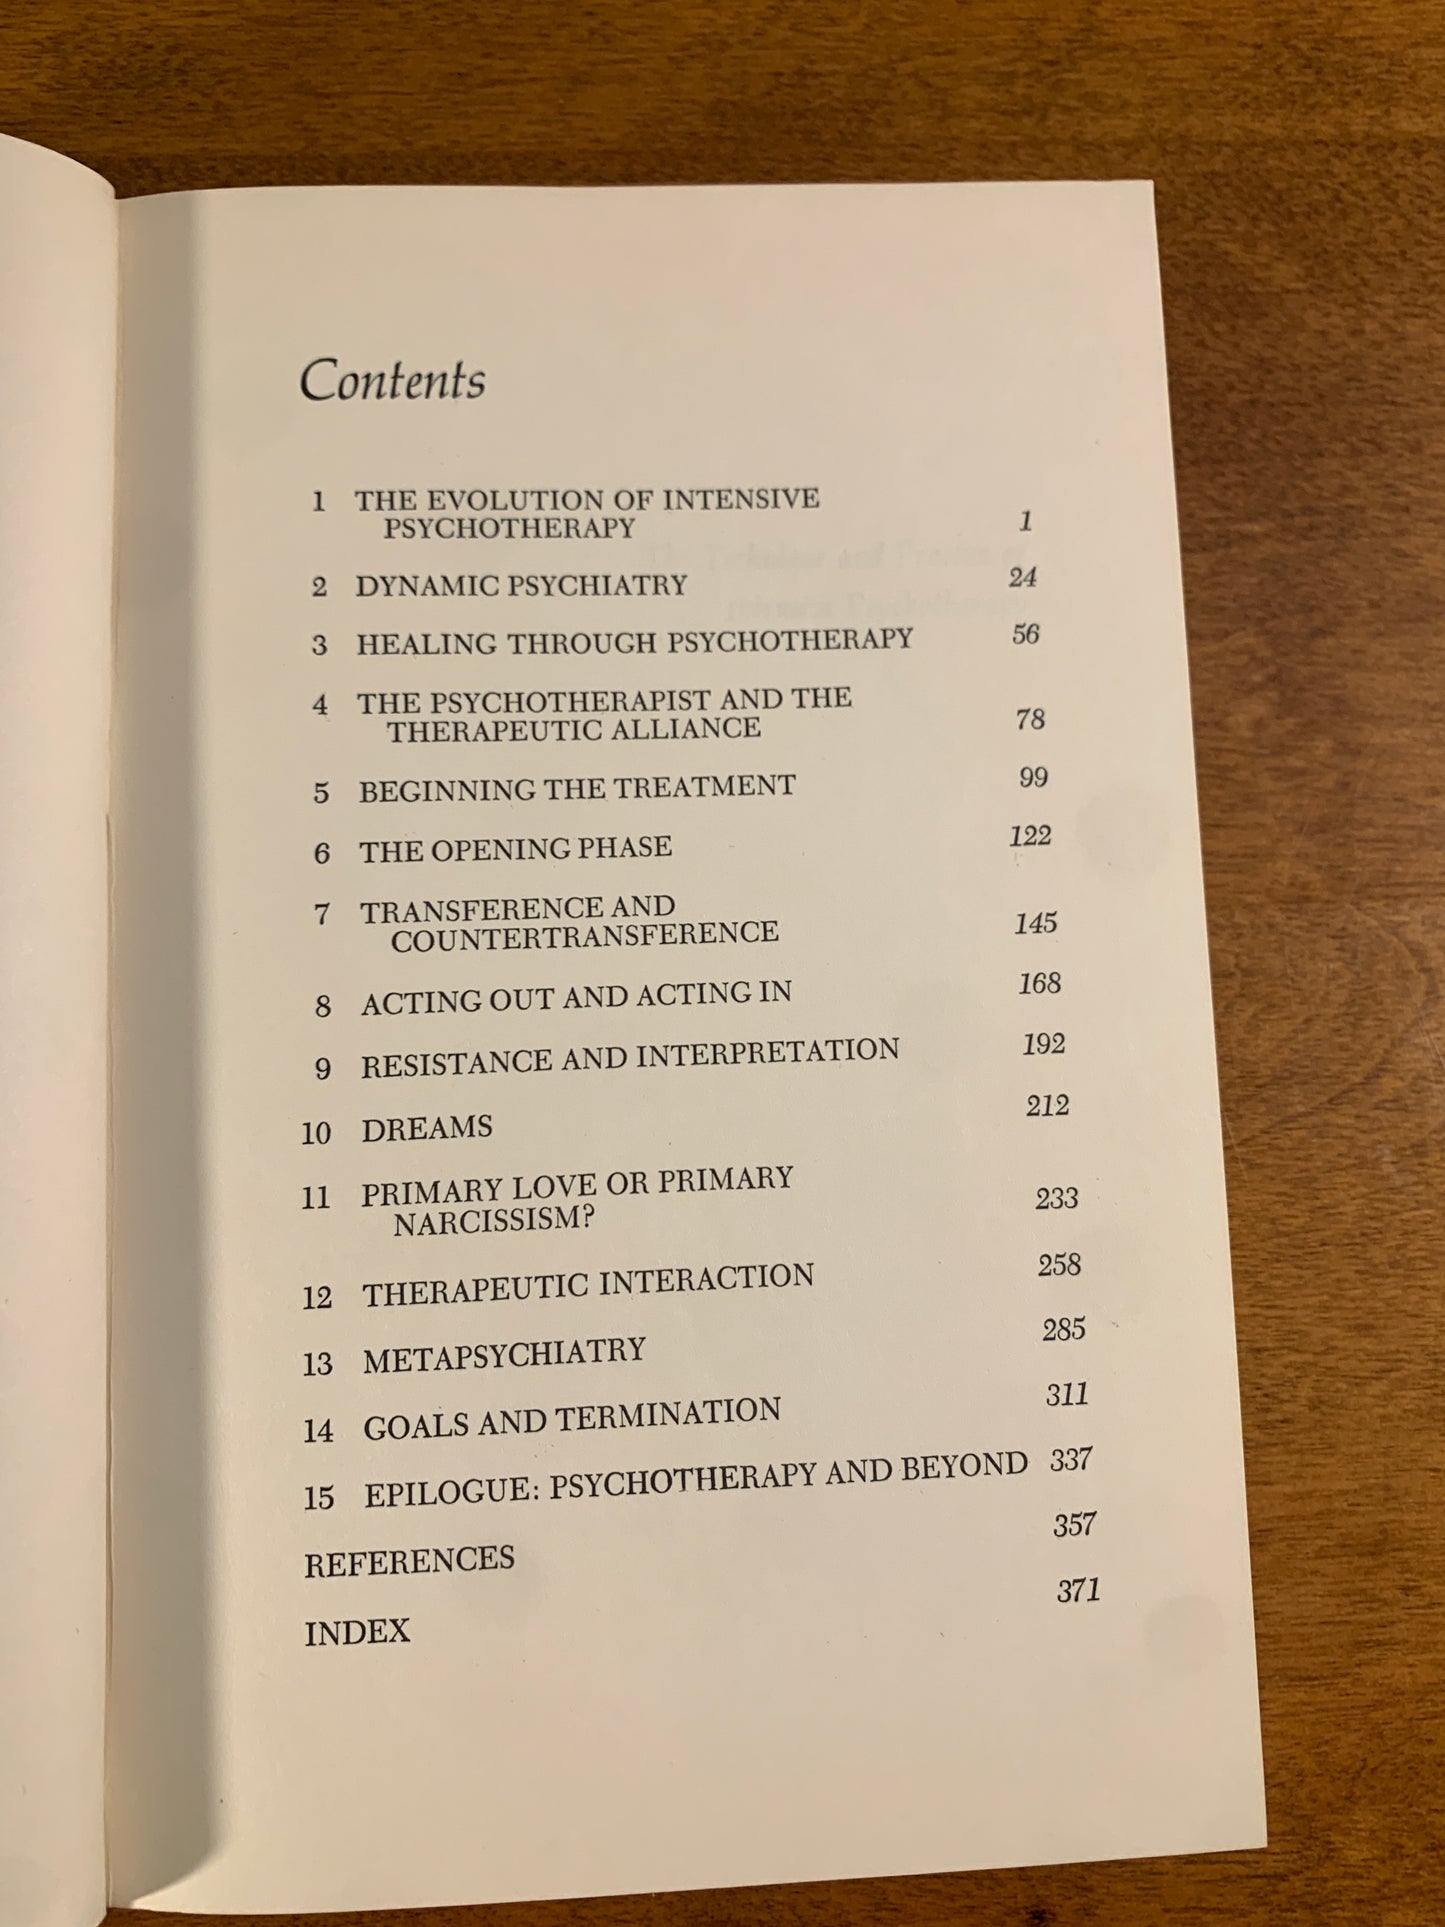 The Technique and Practive of Intensive Psychotherapy by Richard D. Chessick 1974